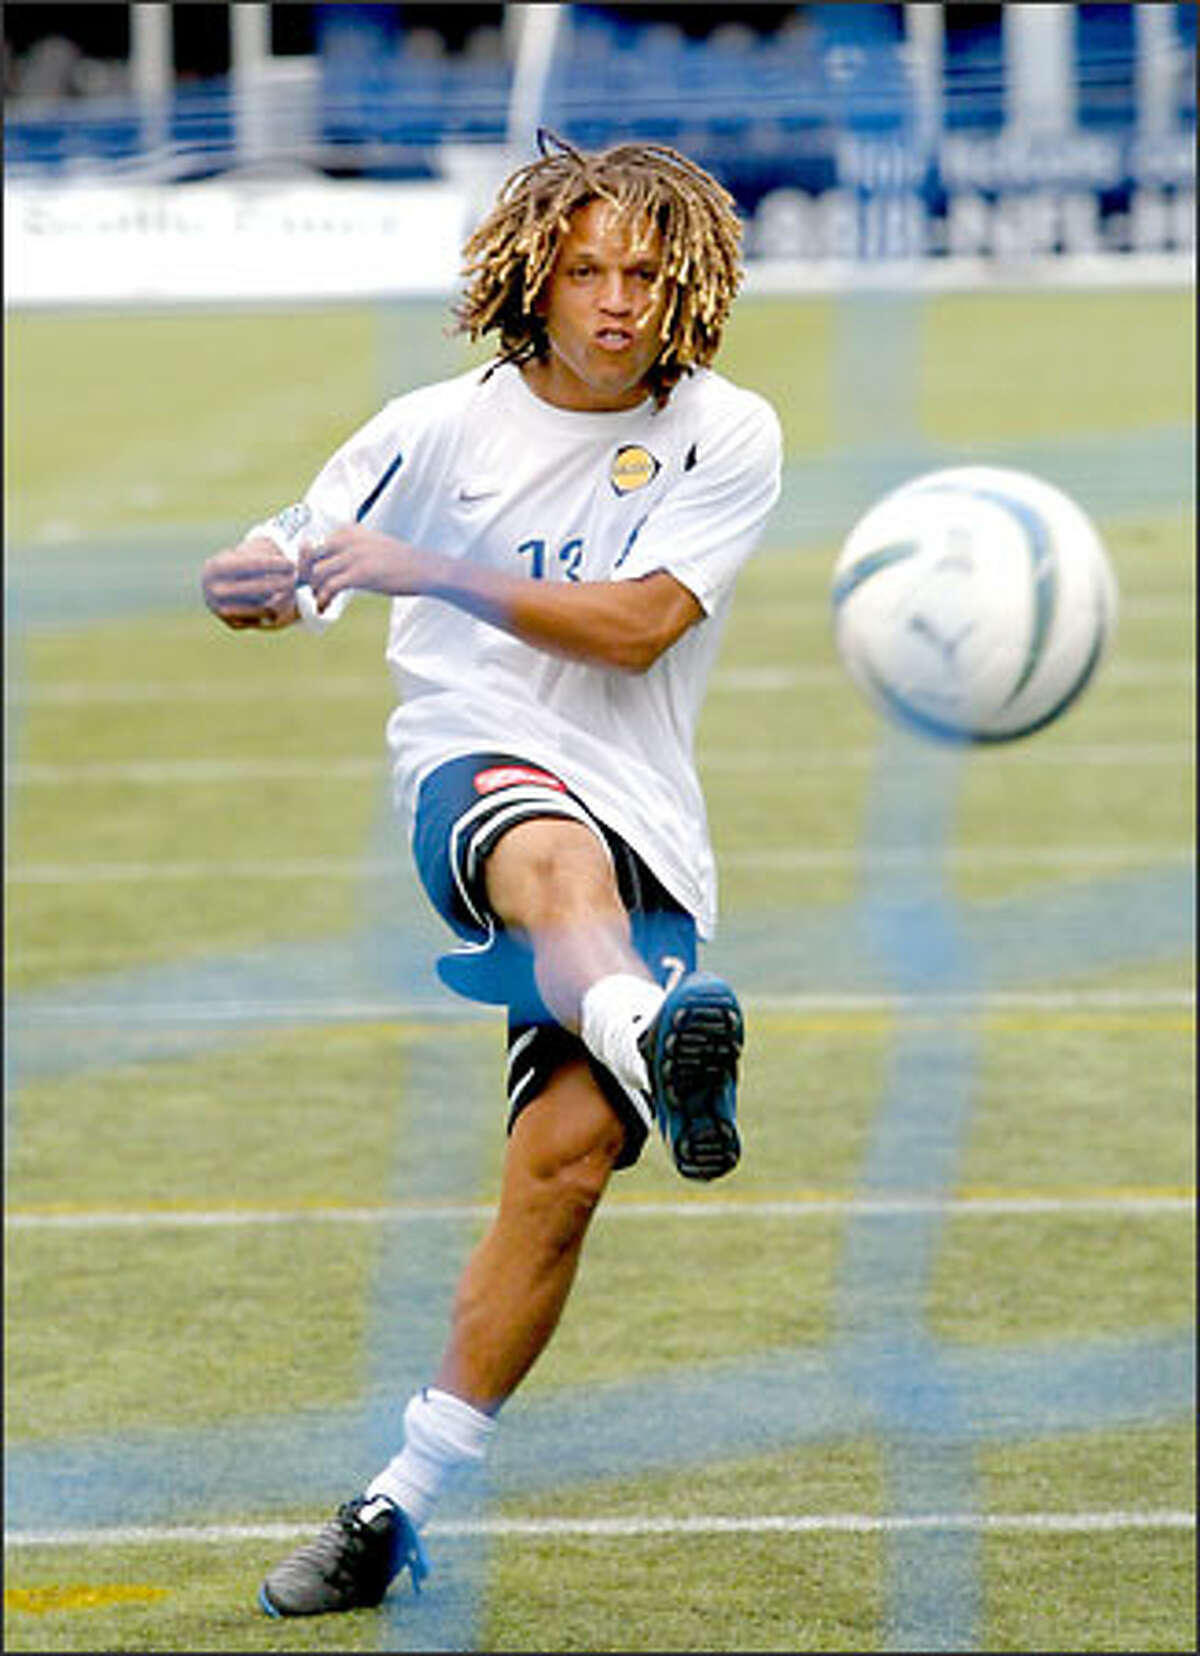 Los Angeles Galaxy star Cobi Jones takes a shot during practice at Seahawks Stadium in preparation for tonight's U.S. Open Cup match.